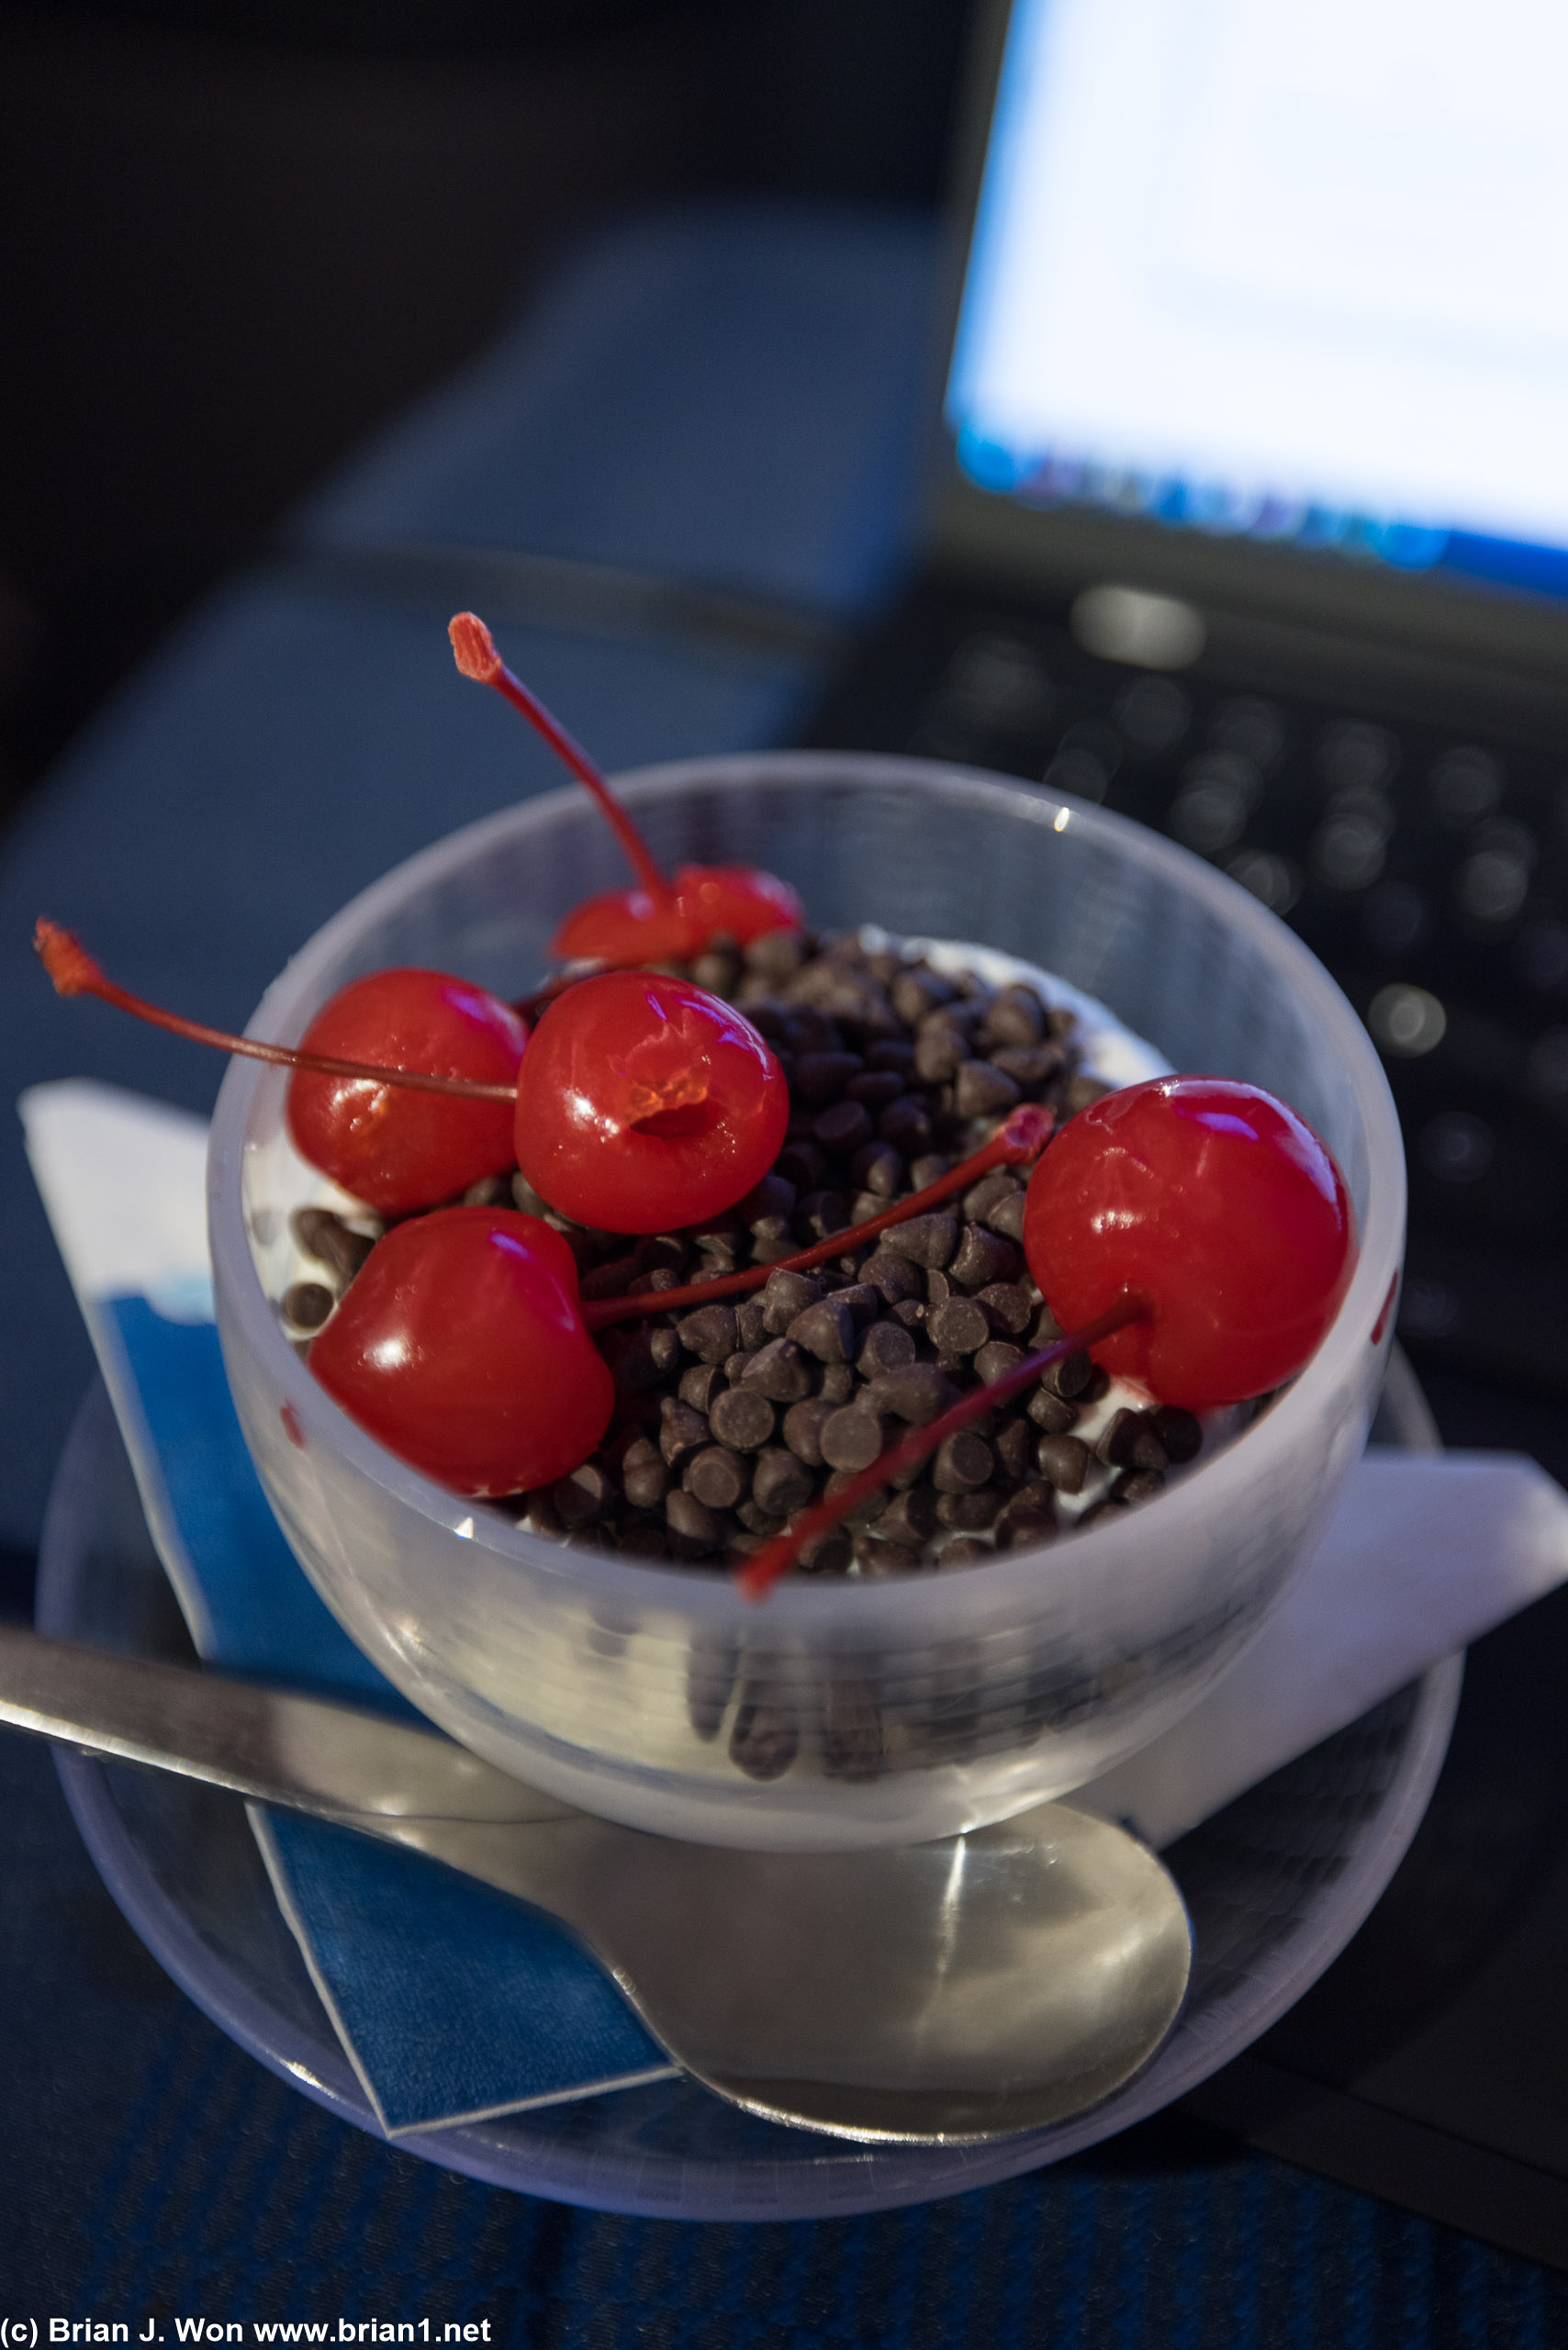 Still no hot fudge, but chocolate chips and cherries do the job.